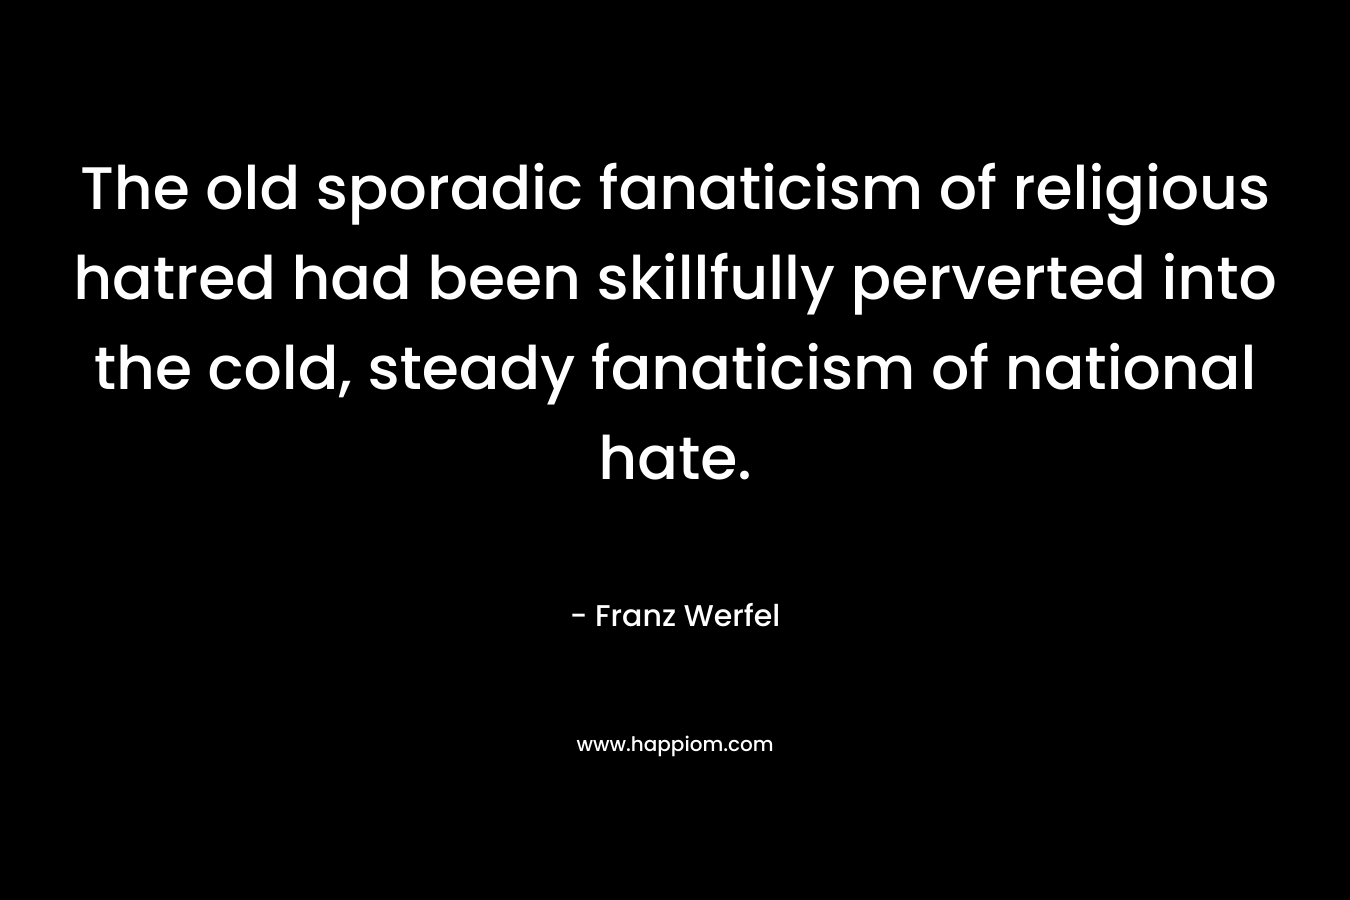 The old sporadic fanaticism of religious hatred had been skillfully perverted into the cold, steady fanaticism of national hate. – Franz Werfel